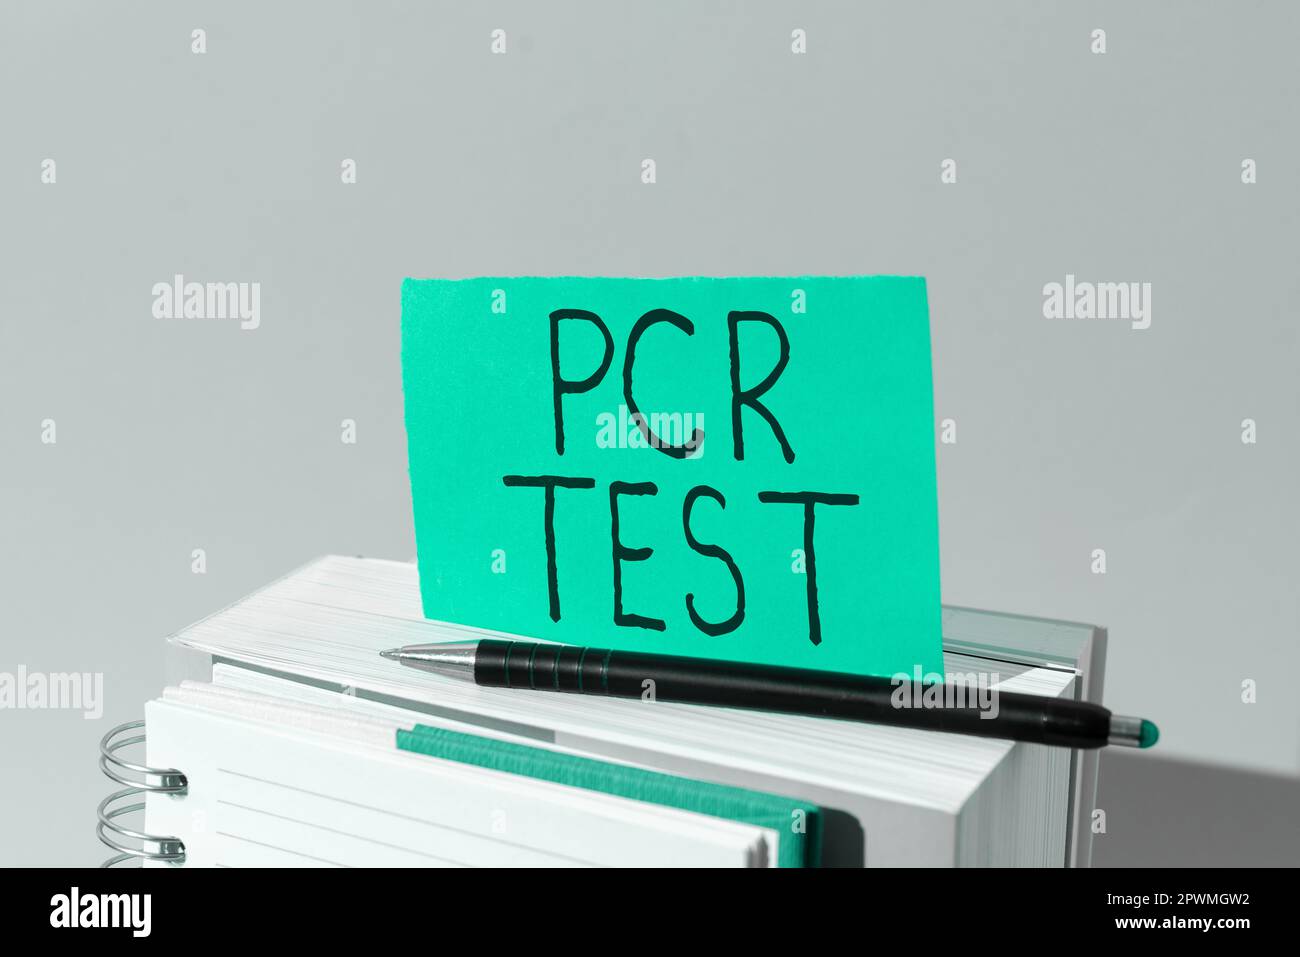 Conceptual display Pcr Test, Business approach qualitative detection of viral genome within the short seqeunce of DNA Stock Photo